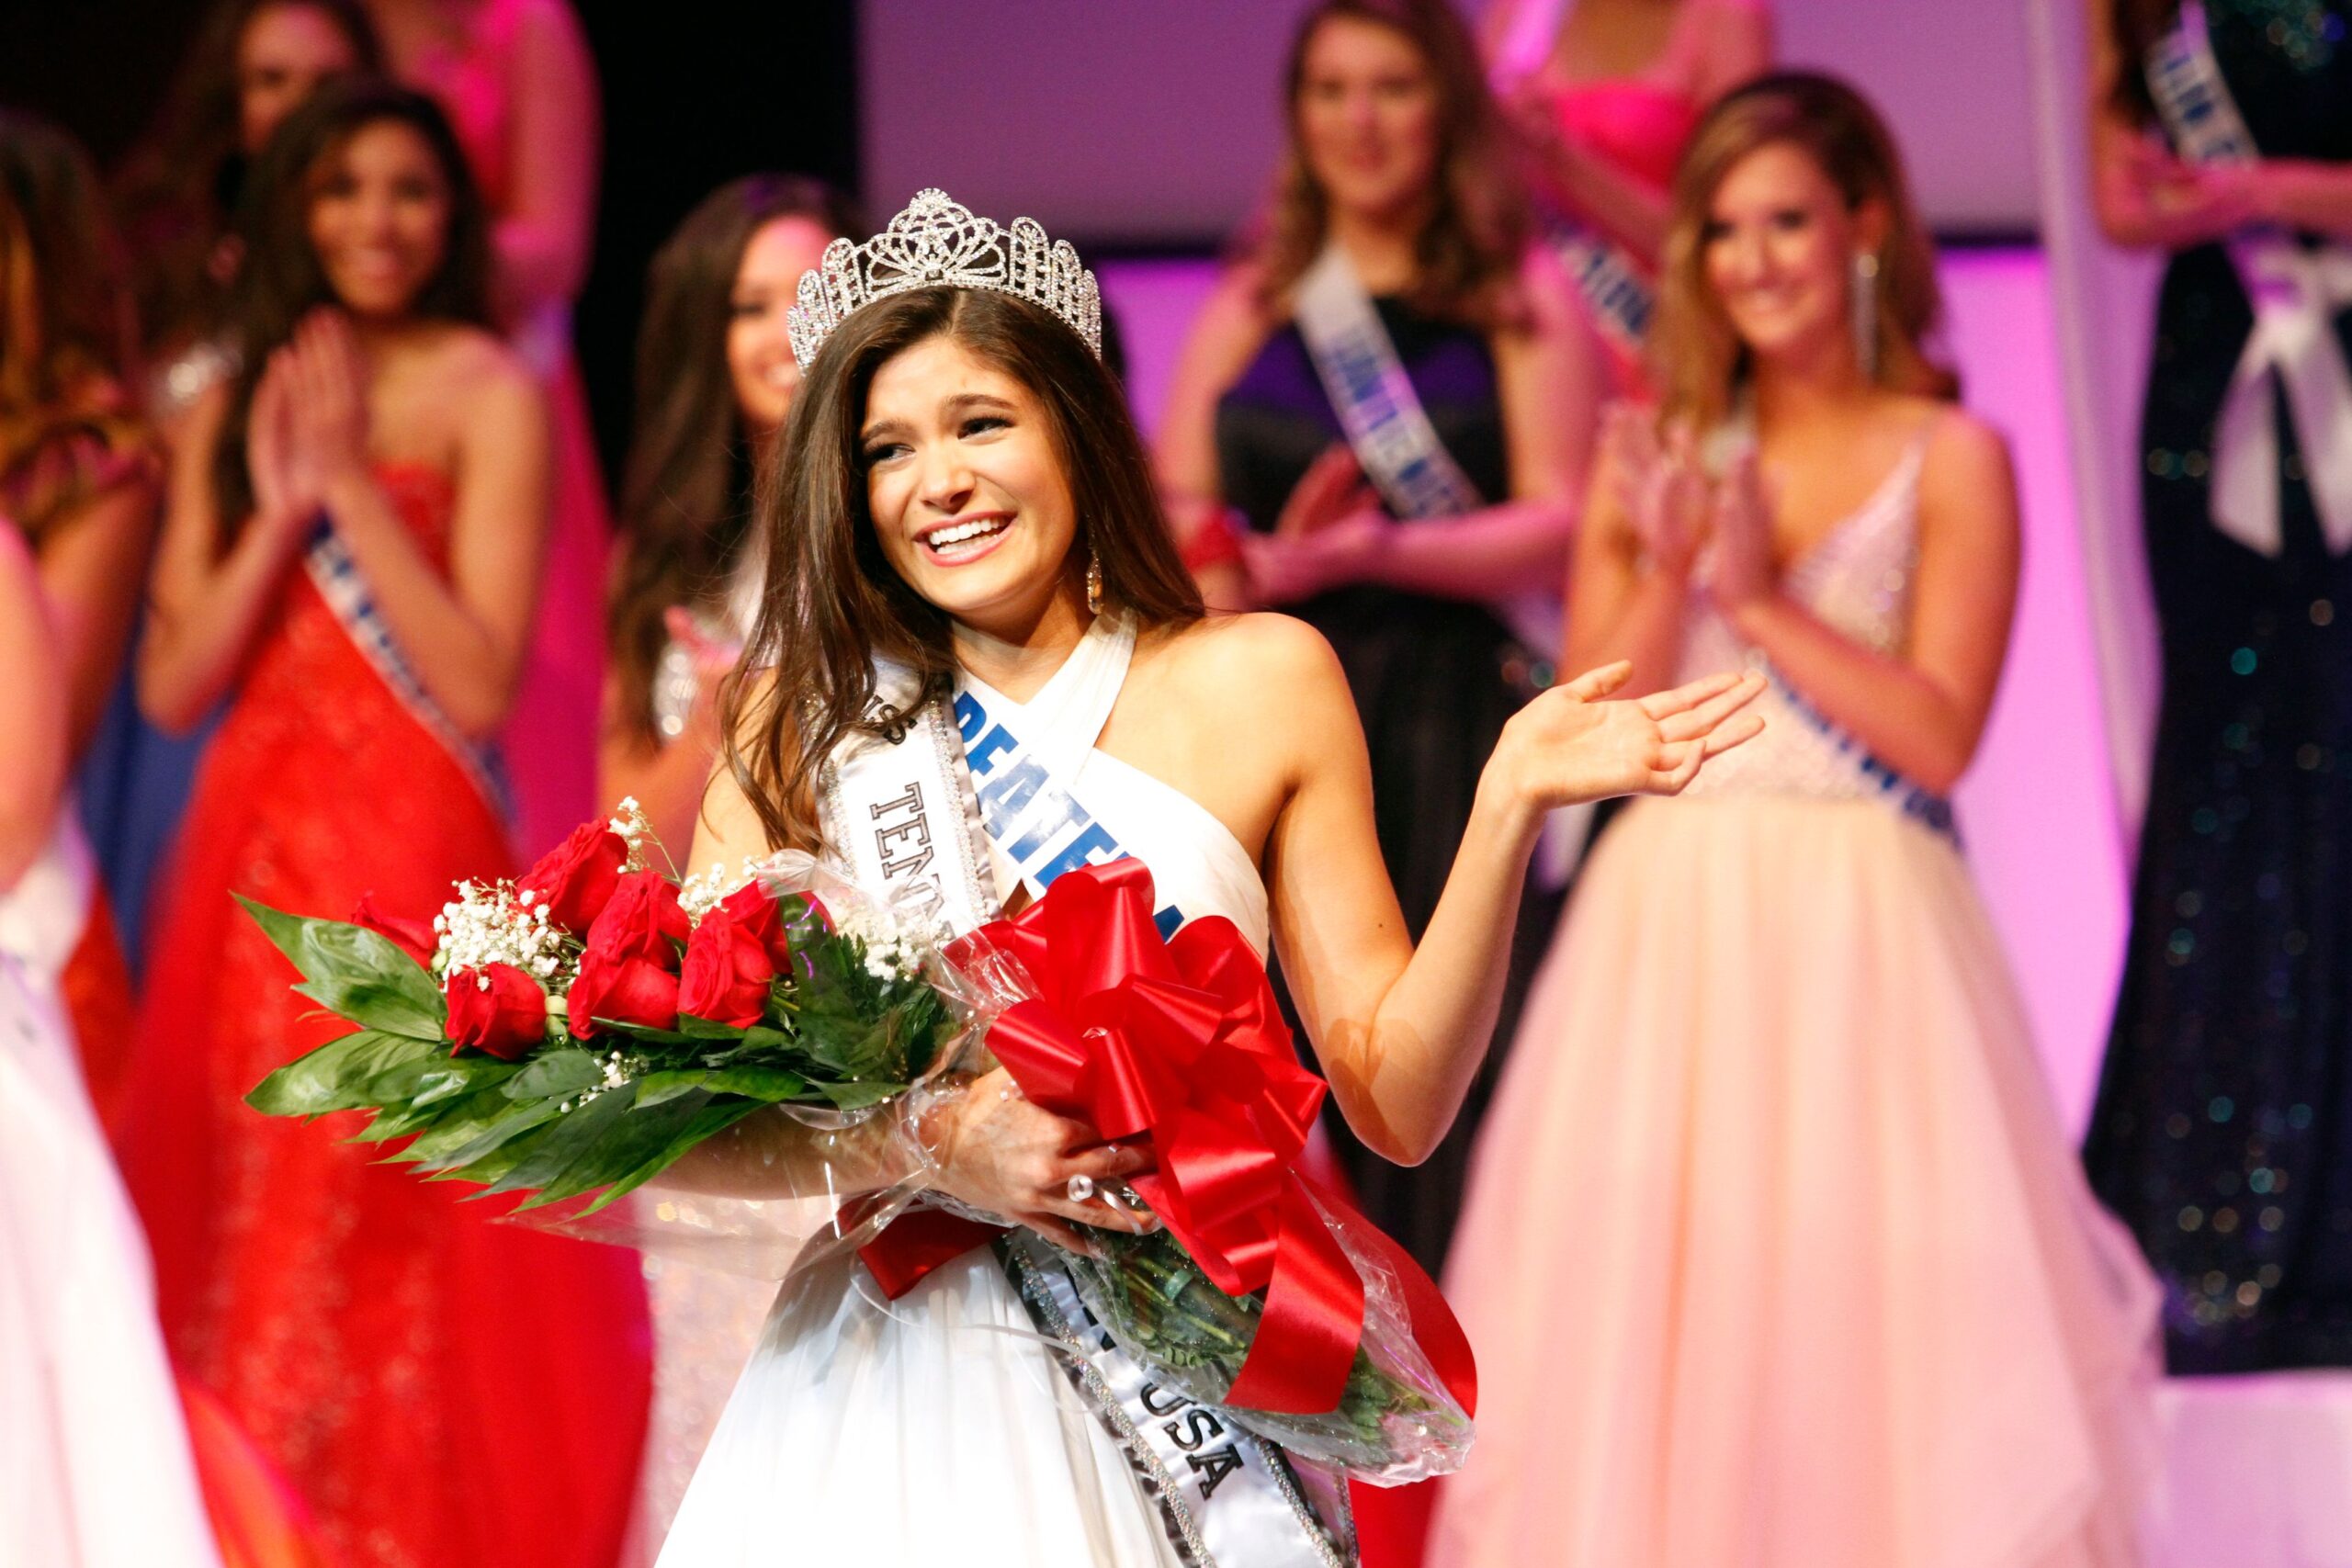 Bailey Guy takes her first walk as Miss Tennessee Teen USA 2019